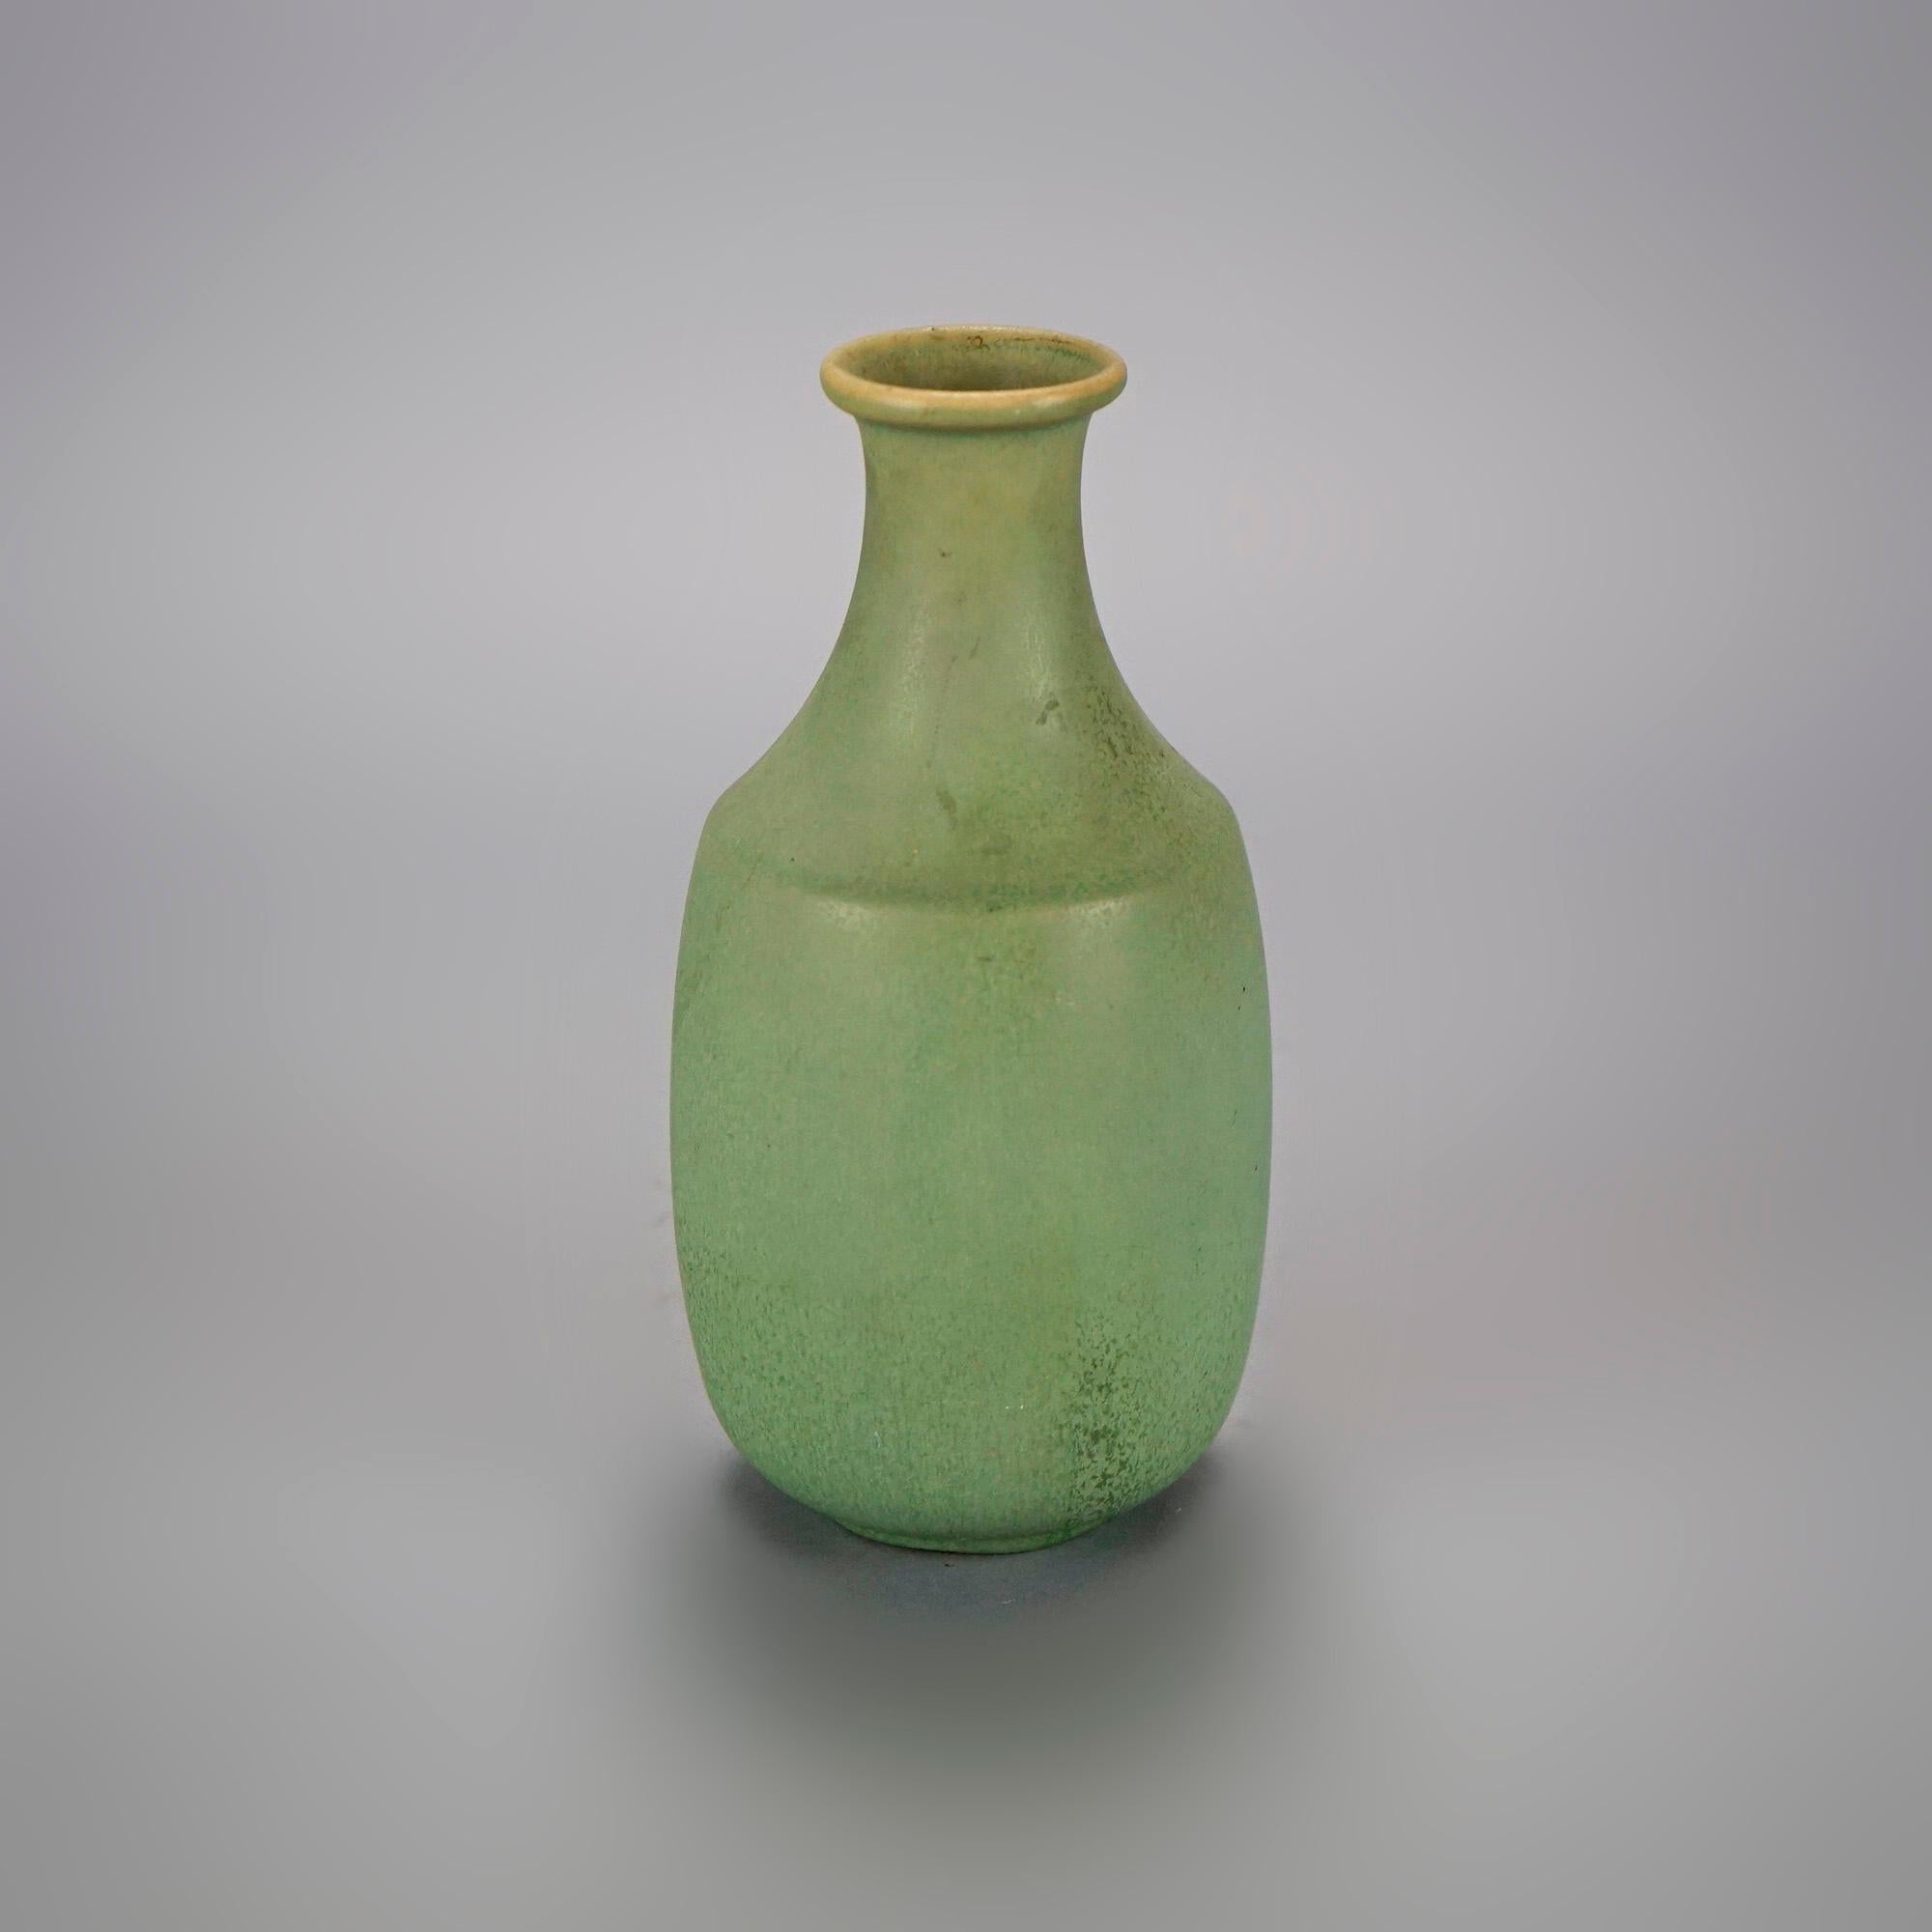 An early antique Arts and Crafts vase by Van Briggle offers art pottery construction in stylized bottle form, maker signed on base as photographed, c1910

Measures- 8.5''H x 4.25''W x 4.25''D